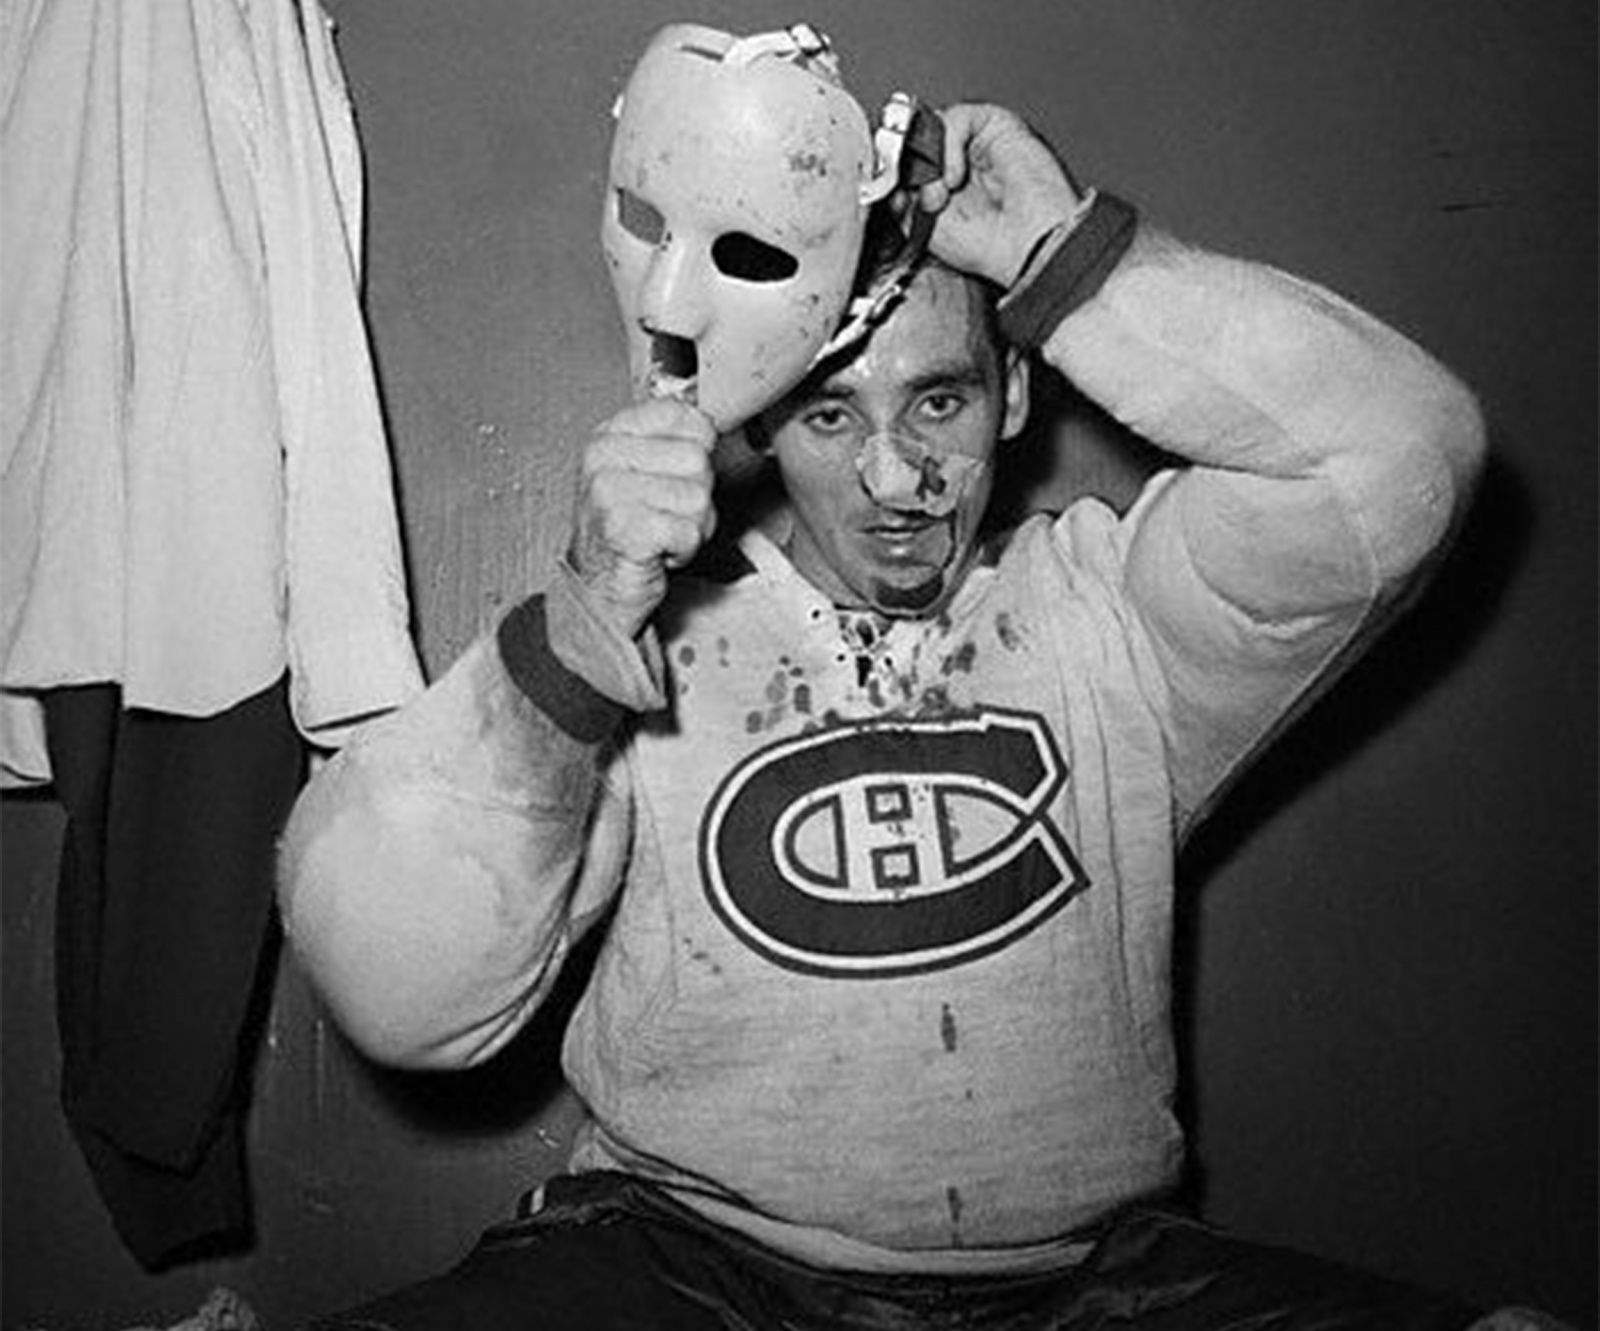 Jacques Plante made history in 1959 when refused to play after a facial injury without a protective mask.